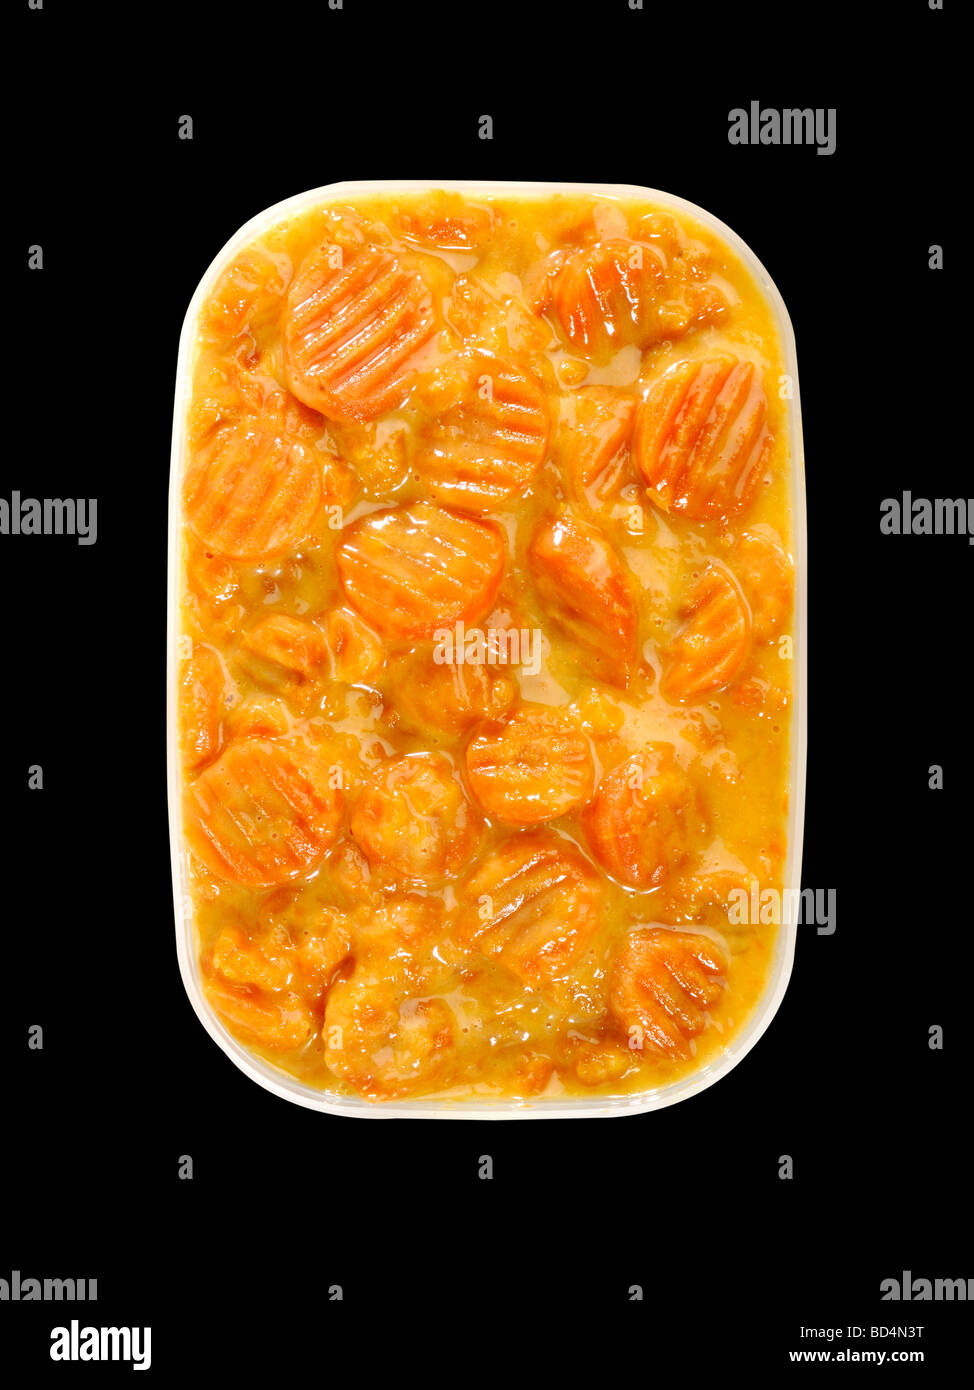 A plastic container with military food rations, sliced carrots in sauce Stock Photo